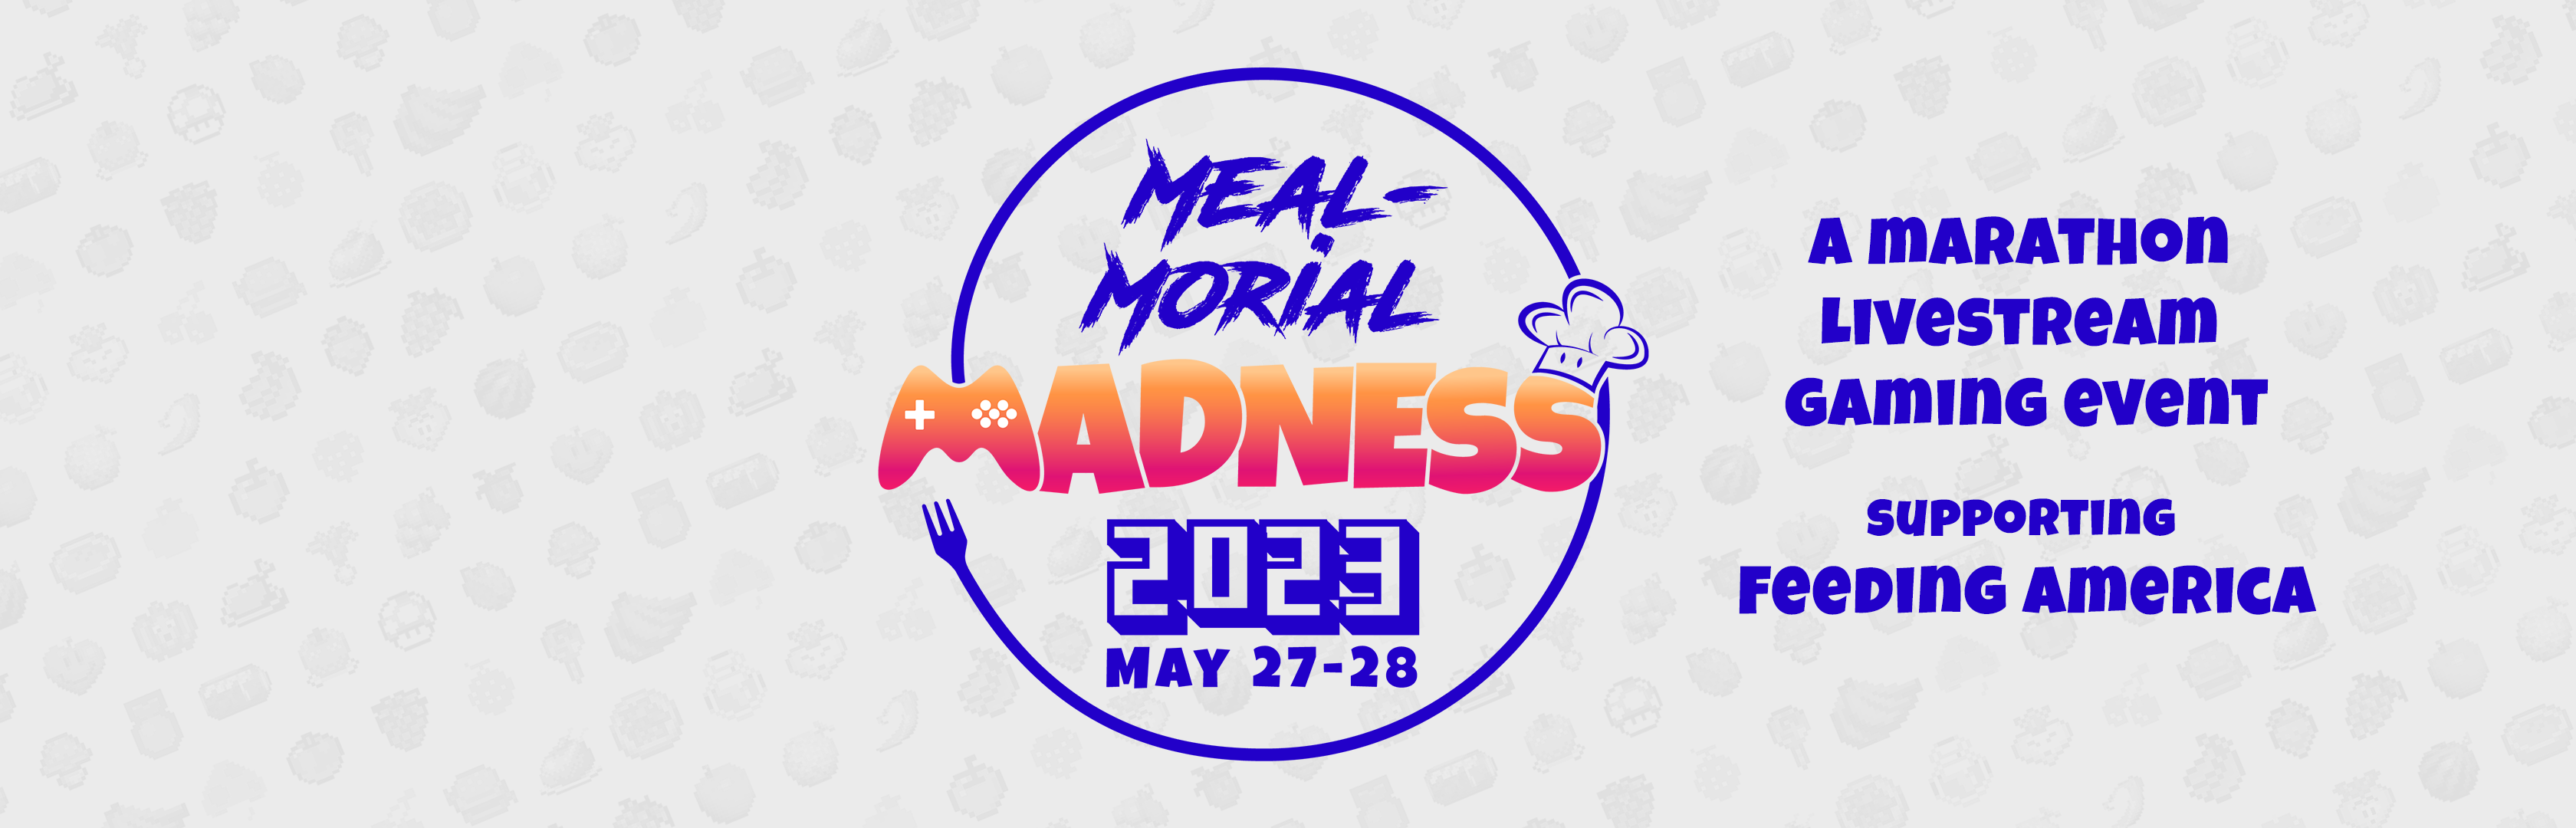 Meal-Morial Madness 2023